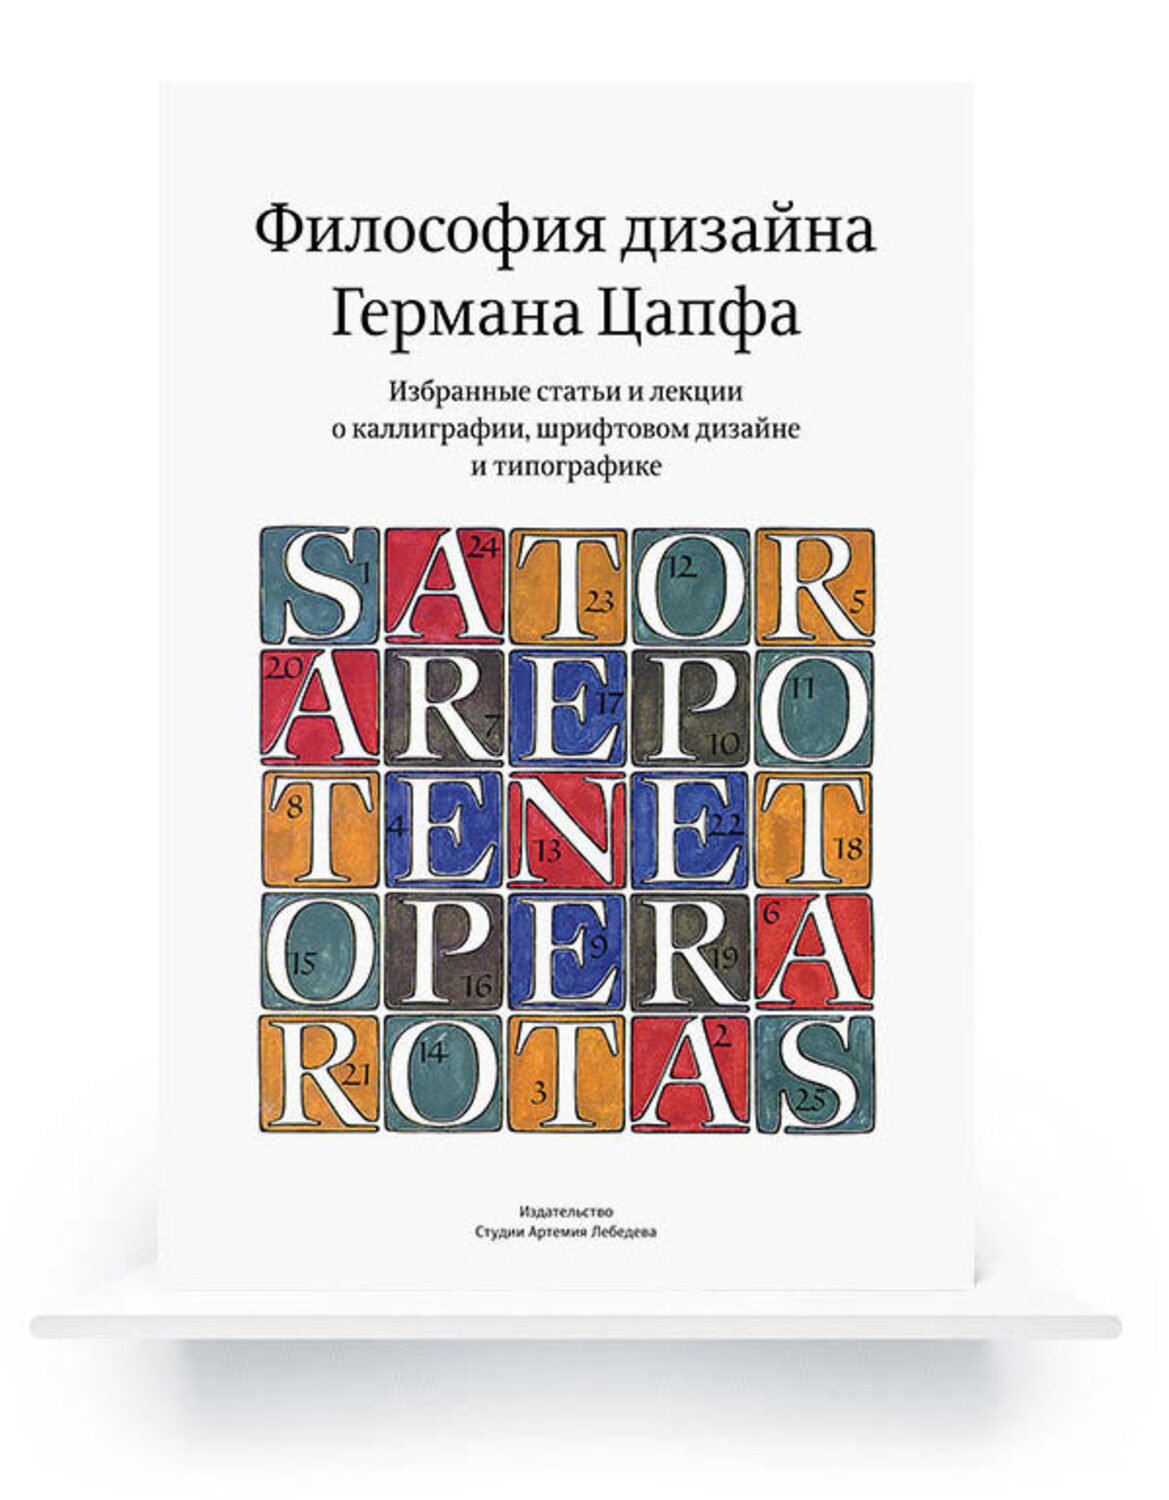 Hermann Zapf and His Design Philosophy. Selected Articles and Lectures on Calligraphy and Contemporary Developments in Type Design (In Russian) e-book